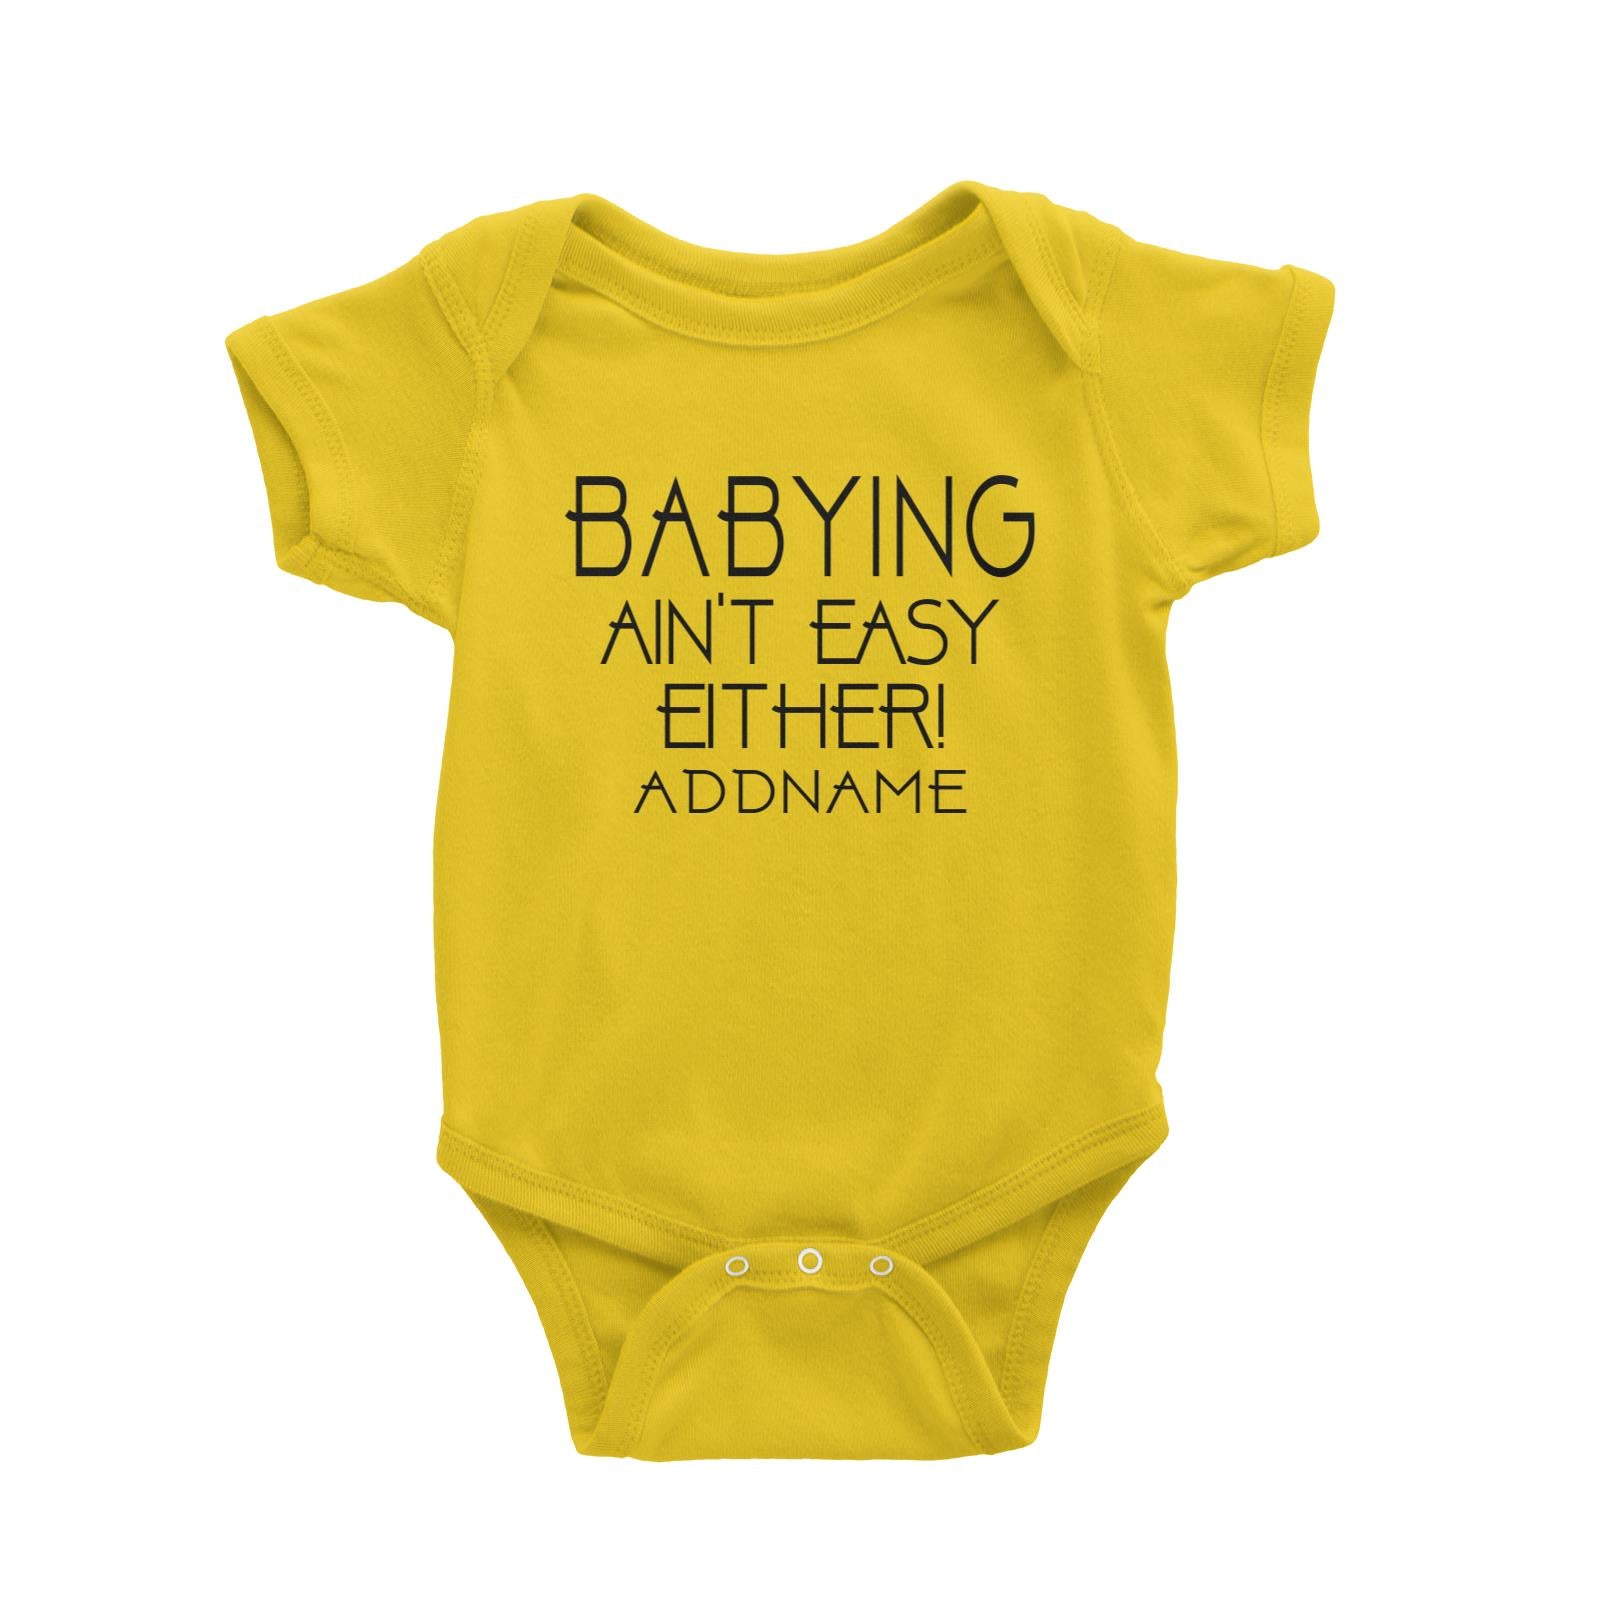 Babying Aint Easy Either Baby Romper